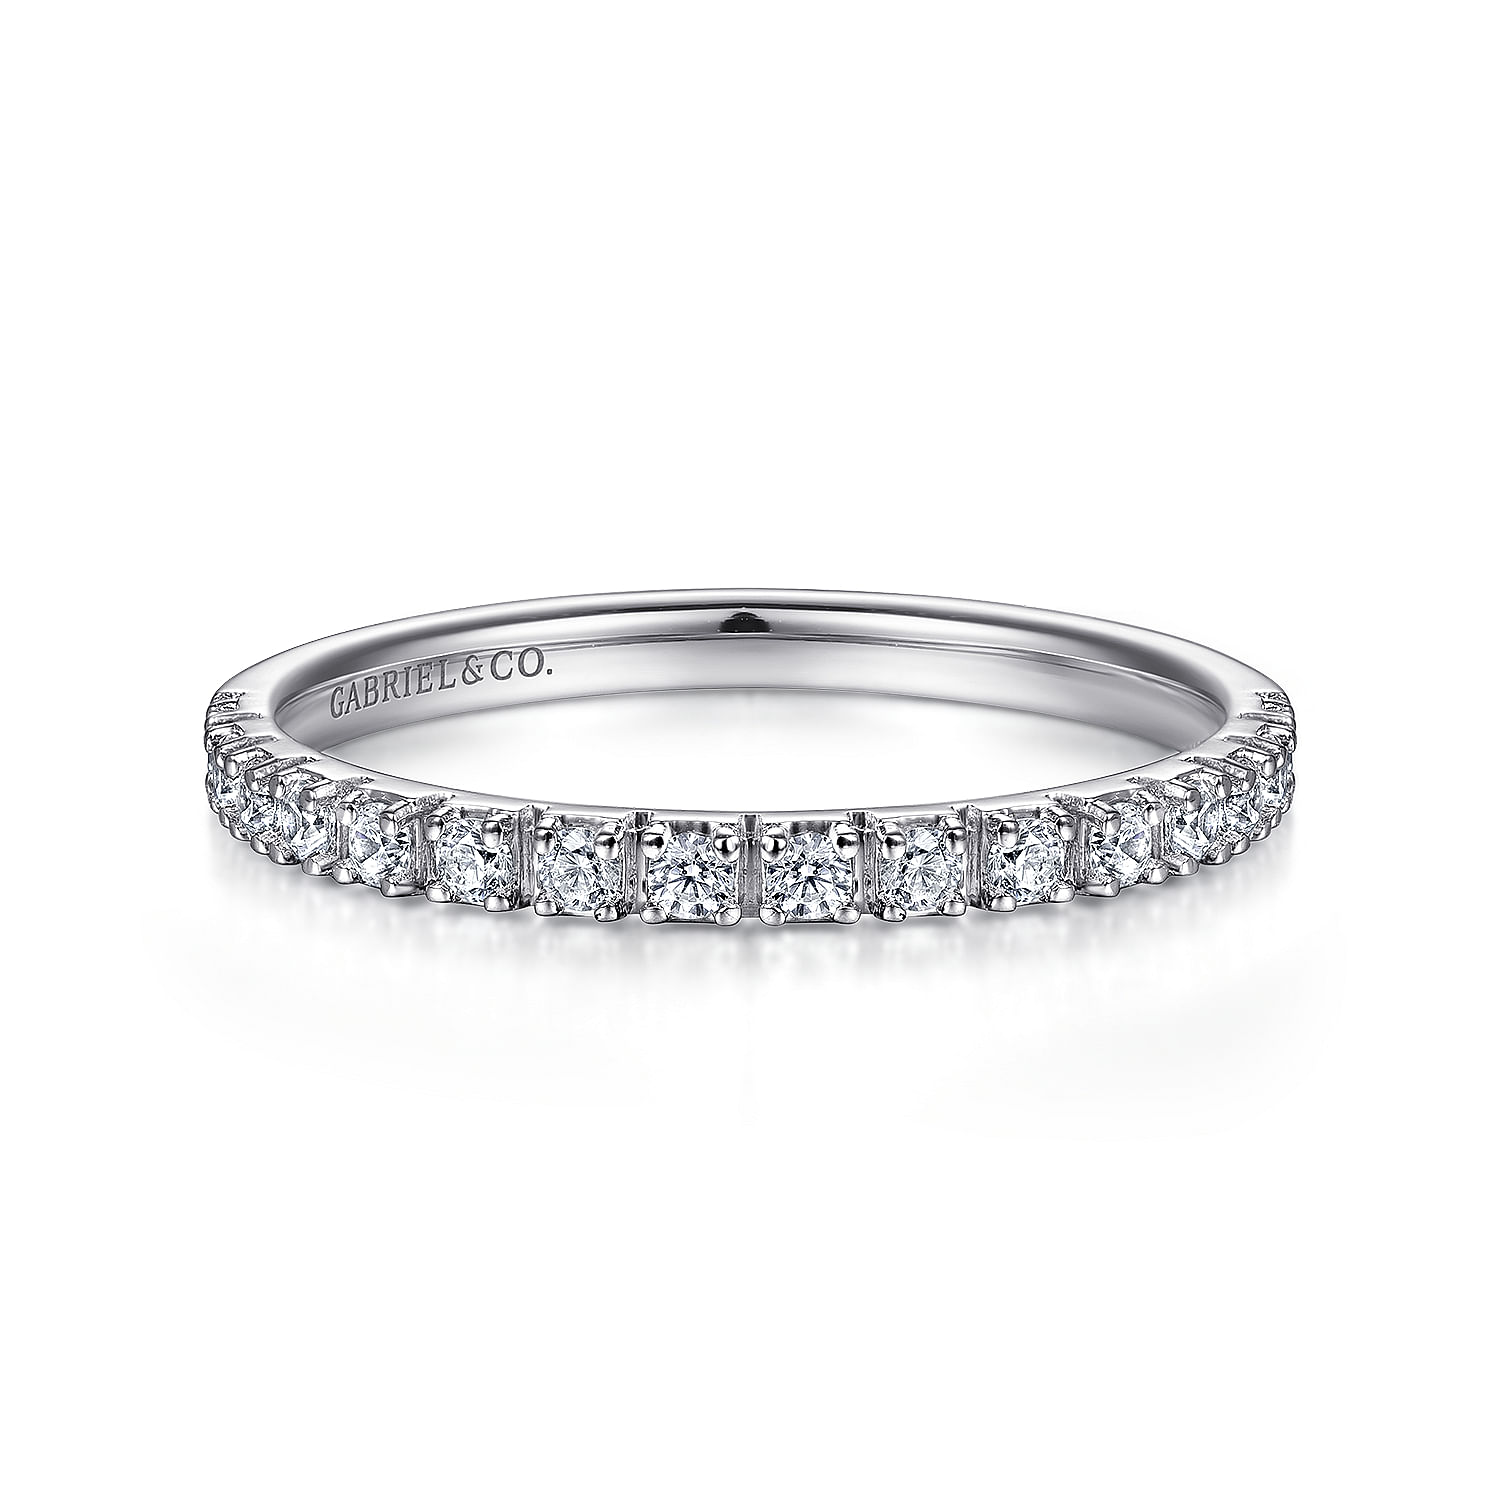 14K White Gold Diamond Stackable Band